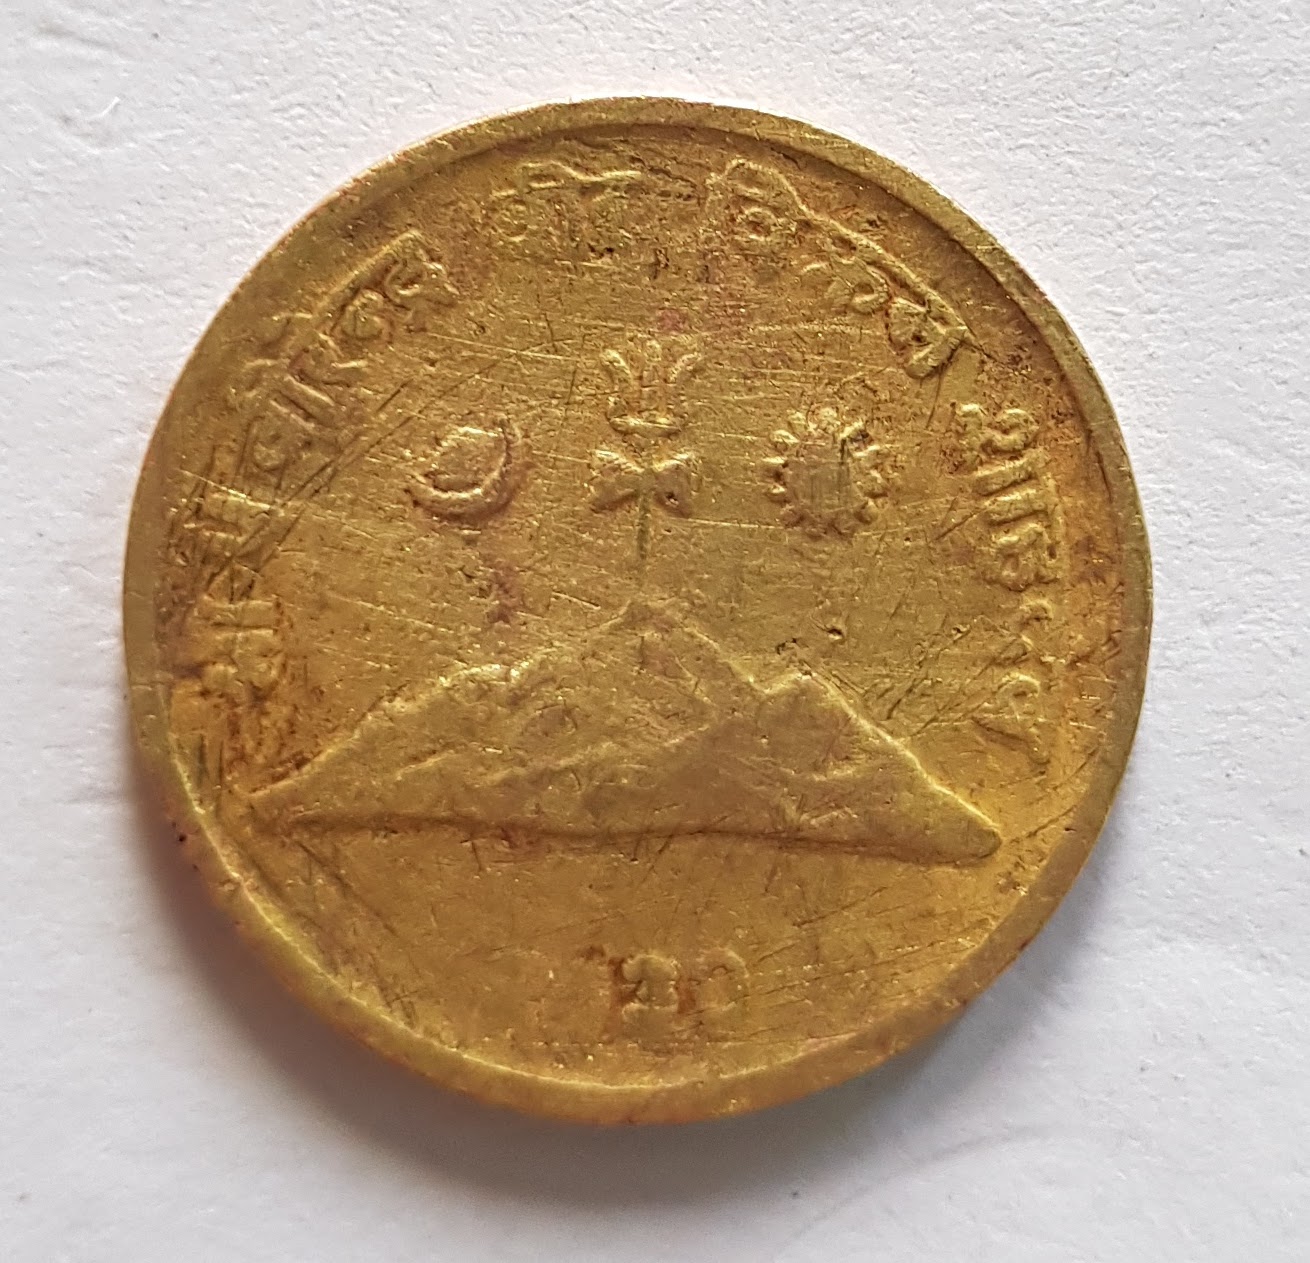 Old Nepali Coins with Historic Importance